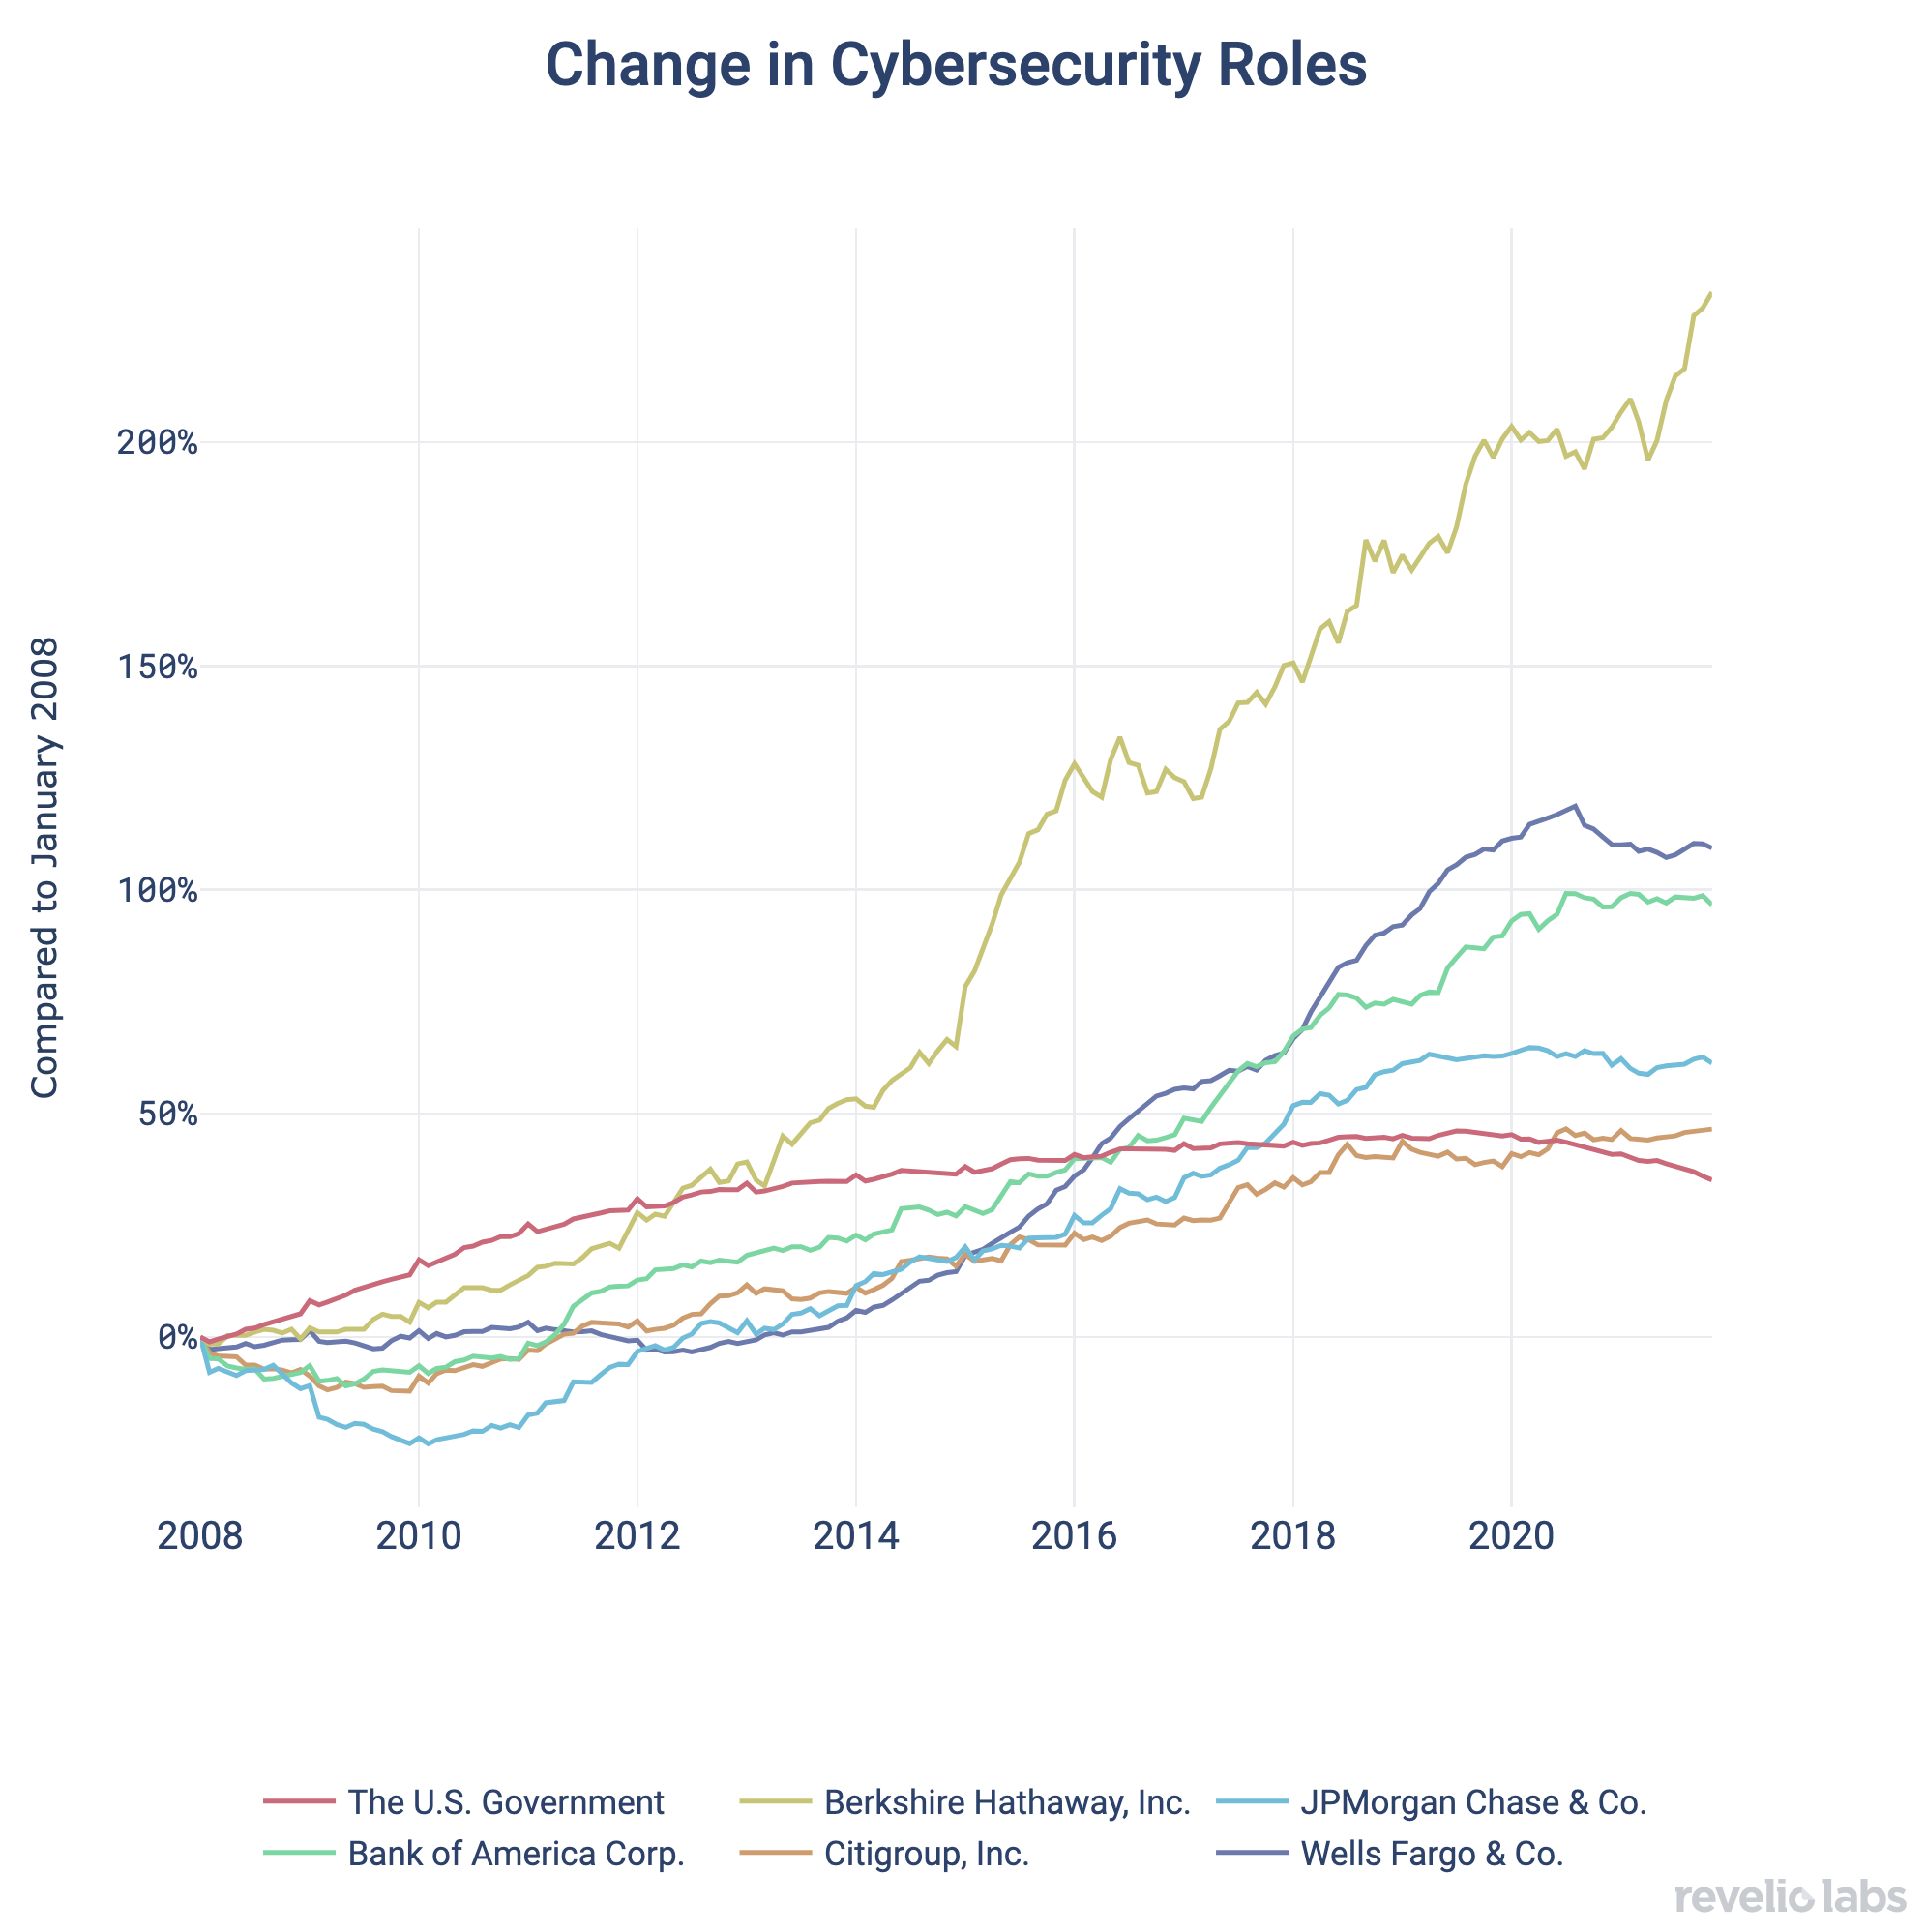 Change in Cybersecurity Roles